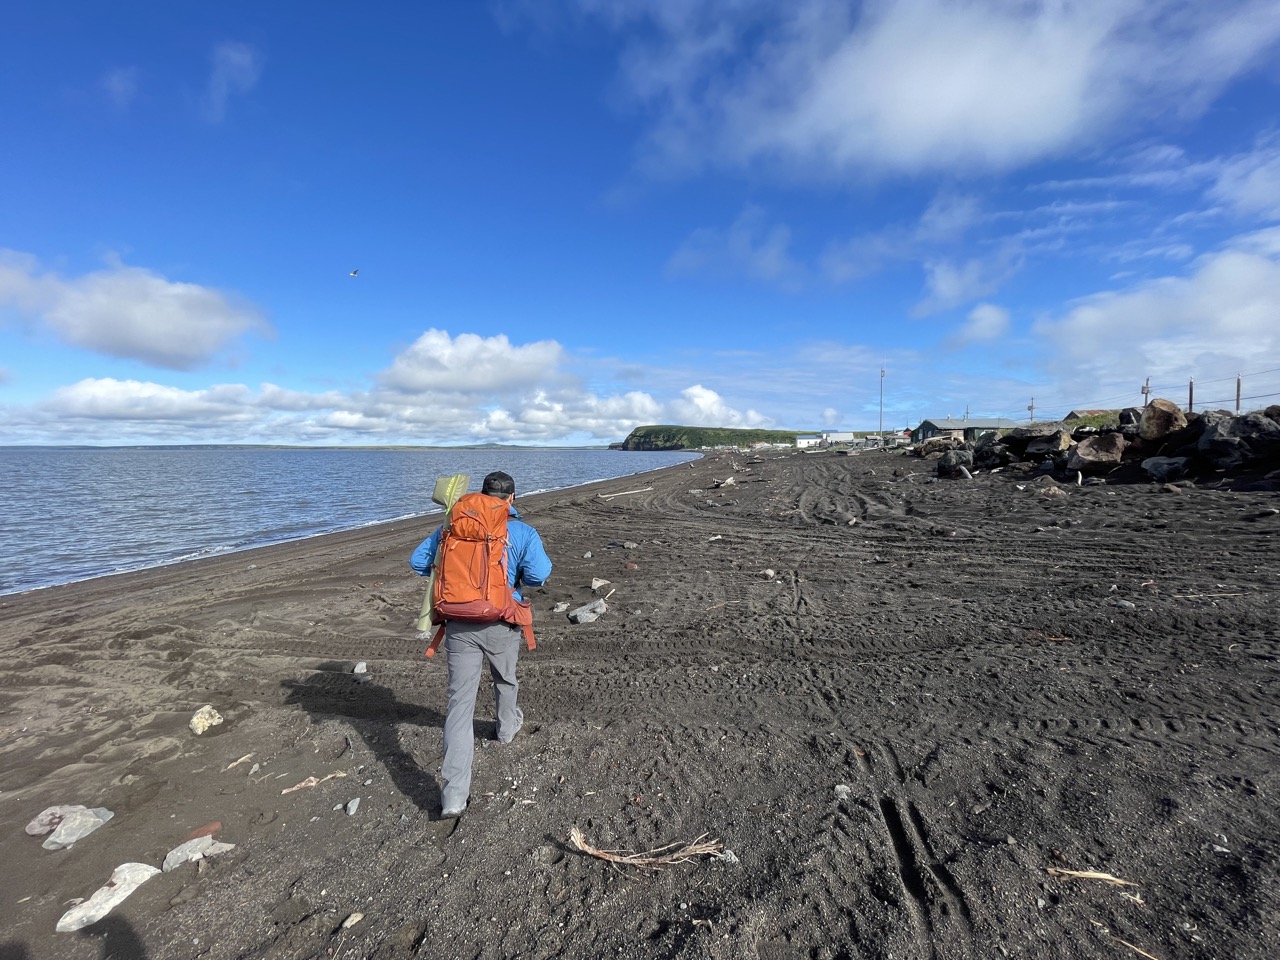 Anthony walking along the shore in Stebbins, Alaska post Typhoon Merbok surveying damage to the coastline, homes and fish camps. 